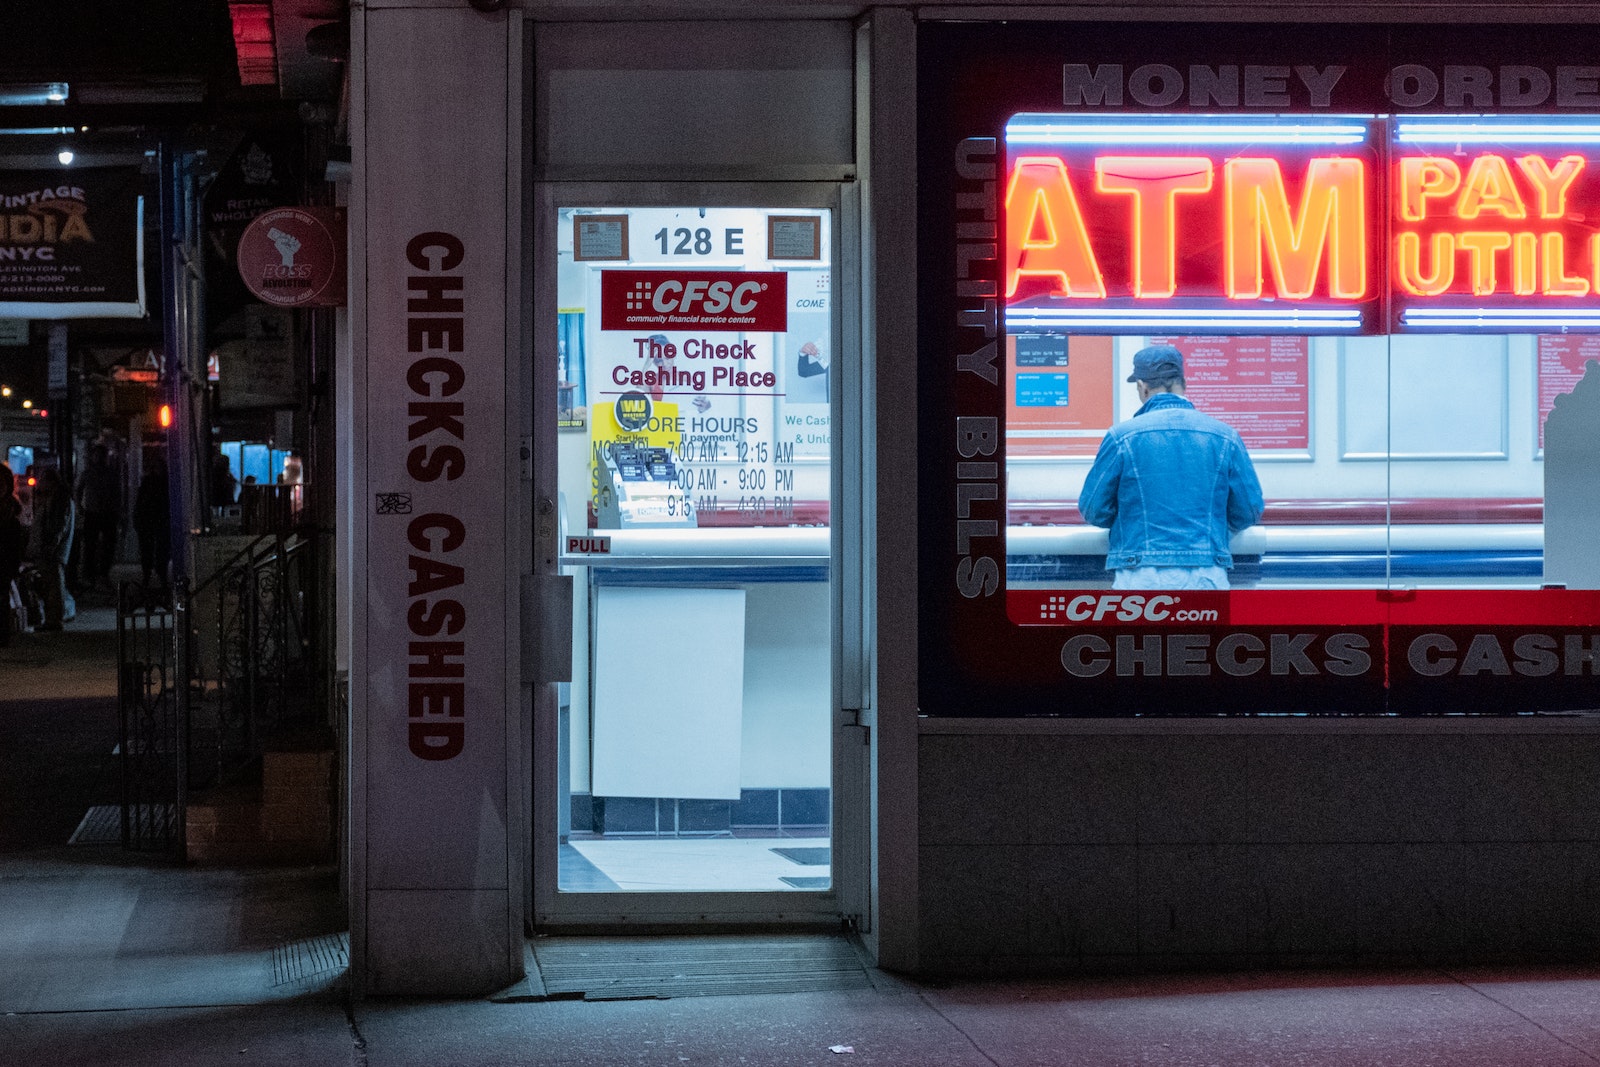 ATM Booth with Neon Signage